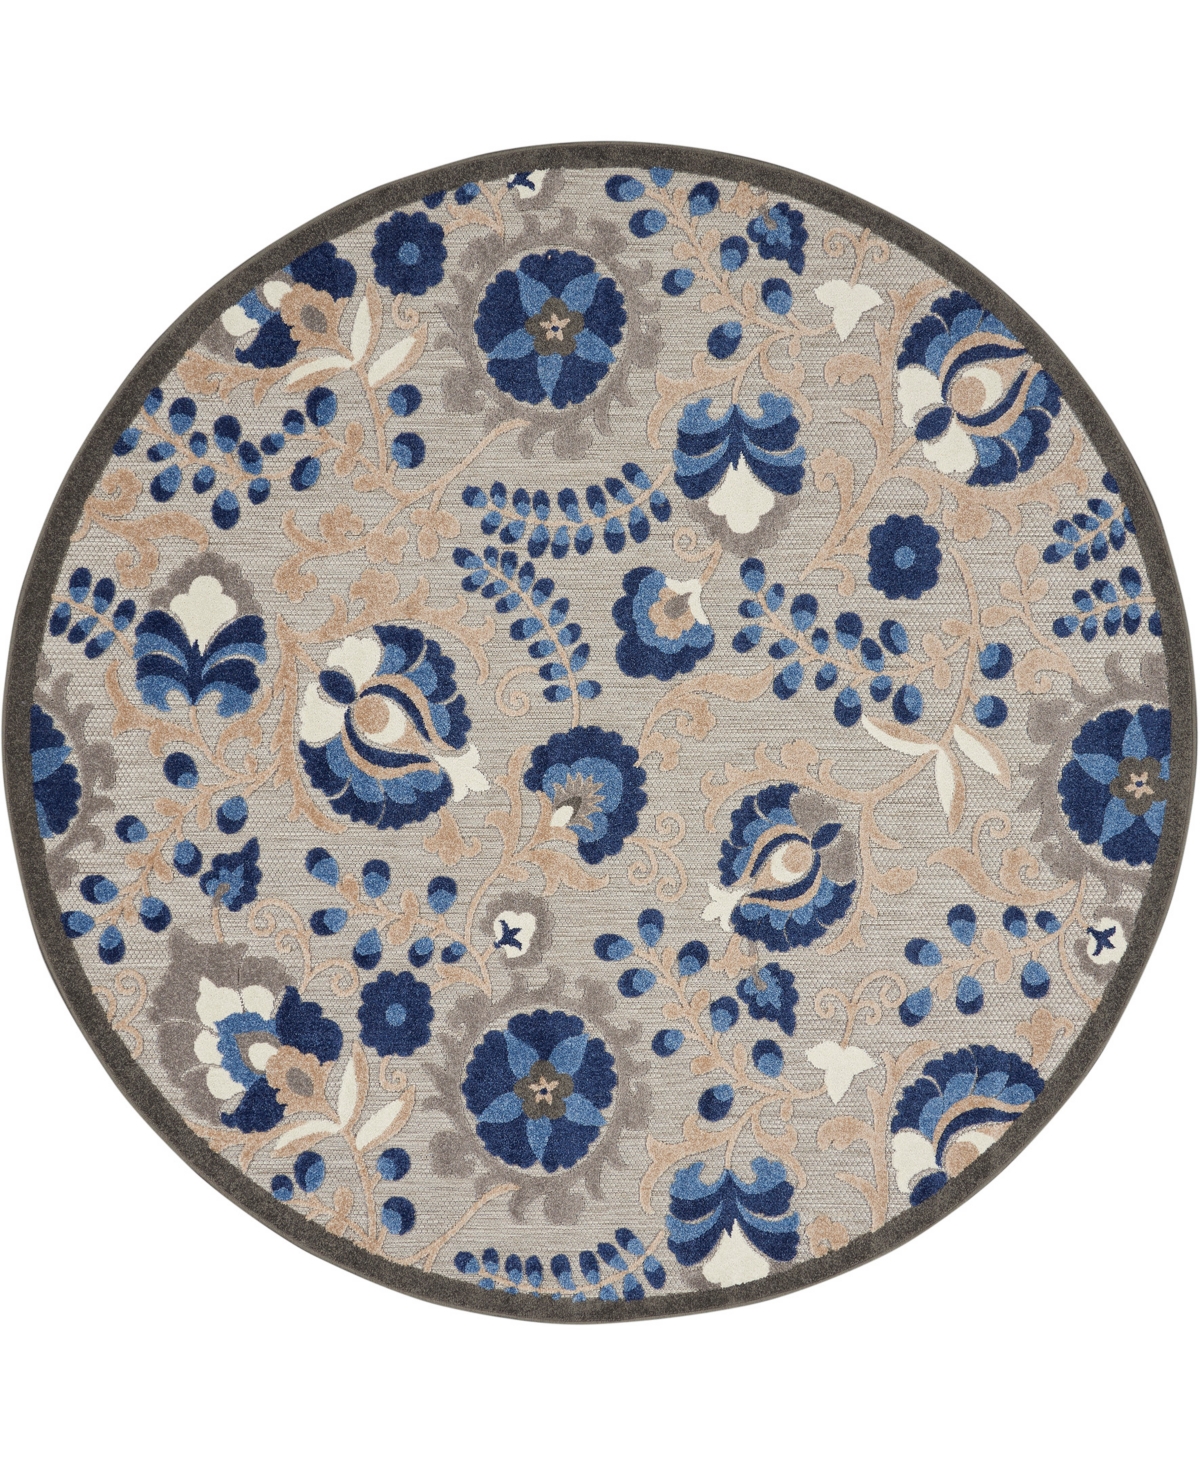 Nourison Home Aloha Alh17 7'10" X 7'10" Round Outdoor Area Rug In Beige,blue